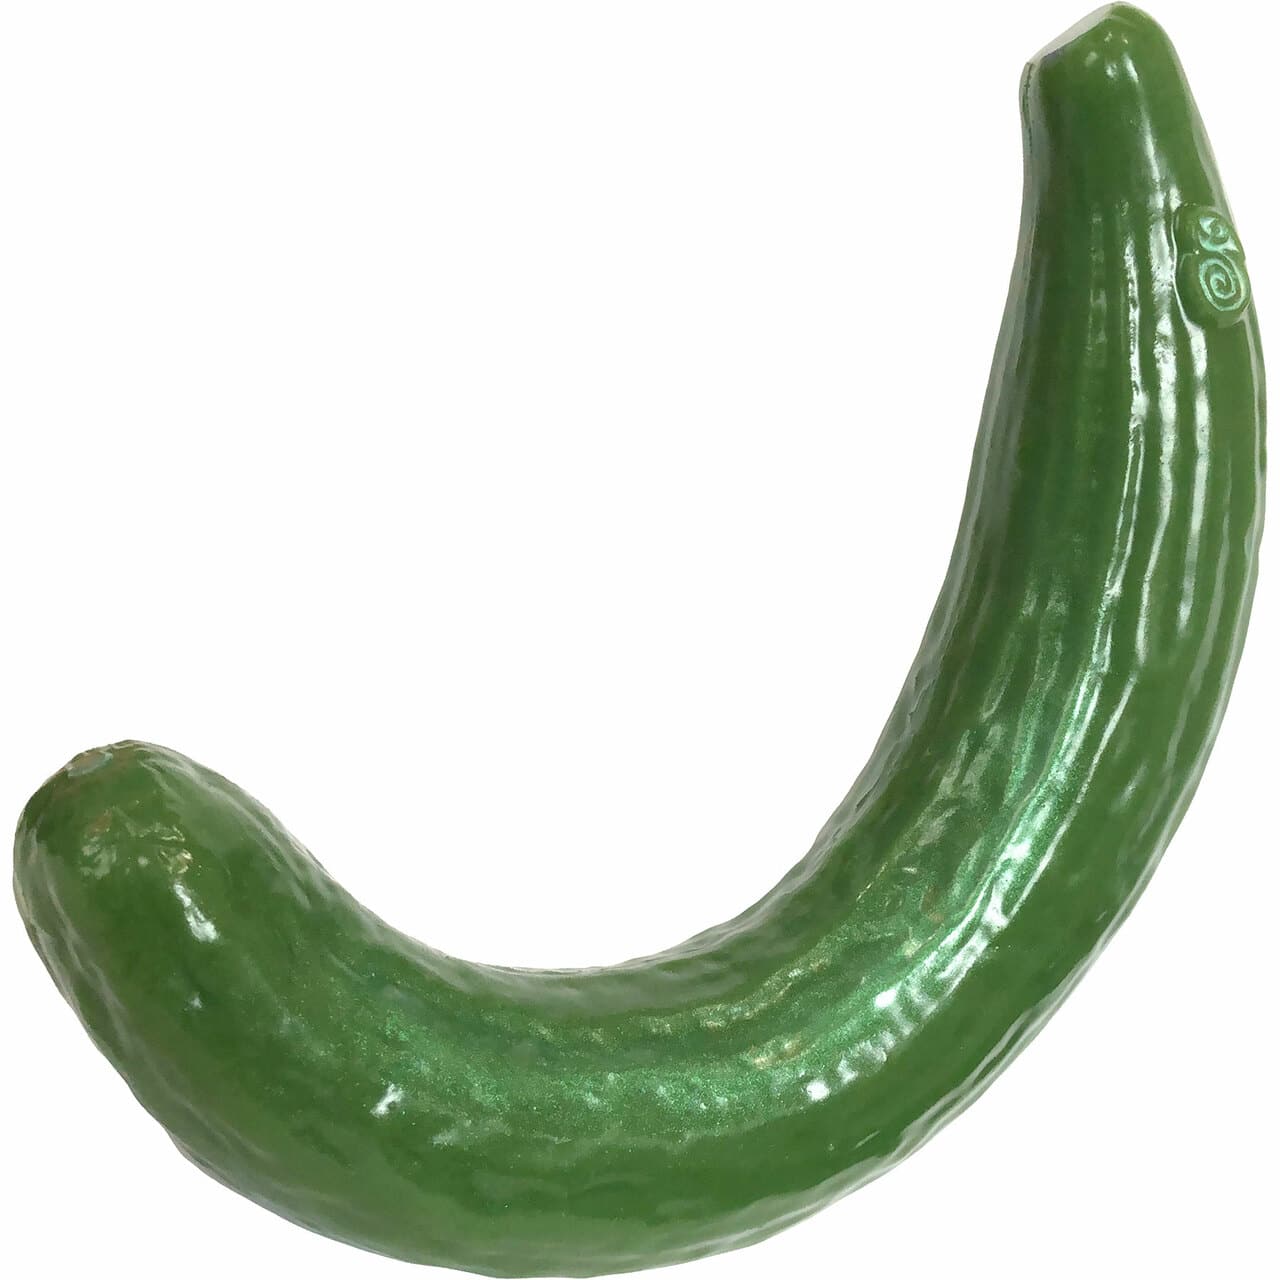 SelfDelve Curved Cucumber Silicone Dildo 